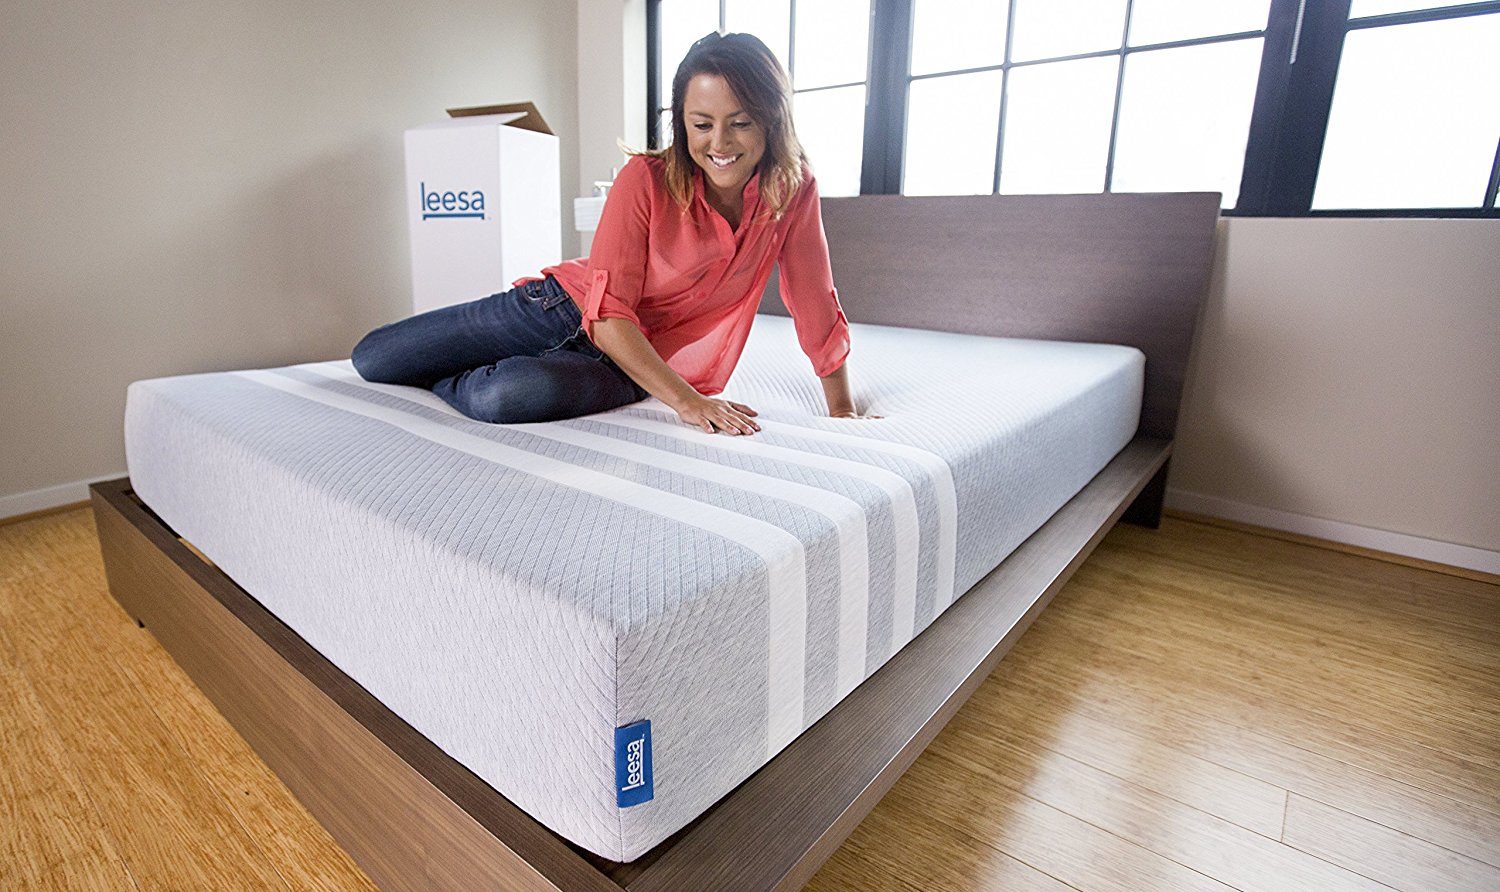 If you're after a bed in a box solution, the Leesa is one of the f...